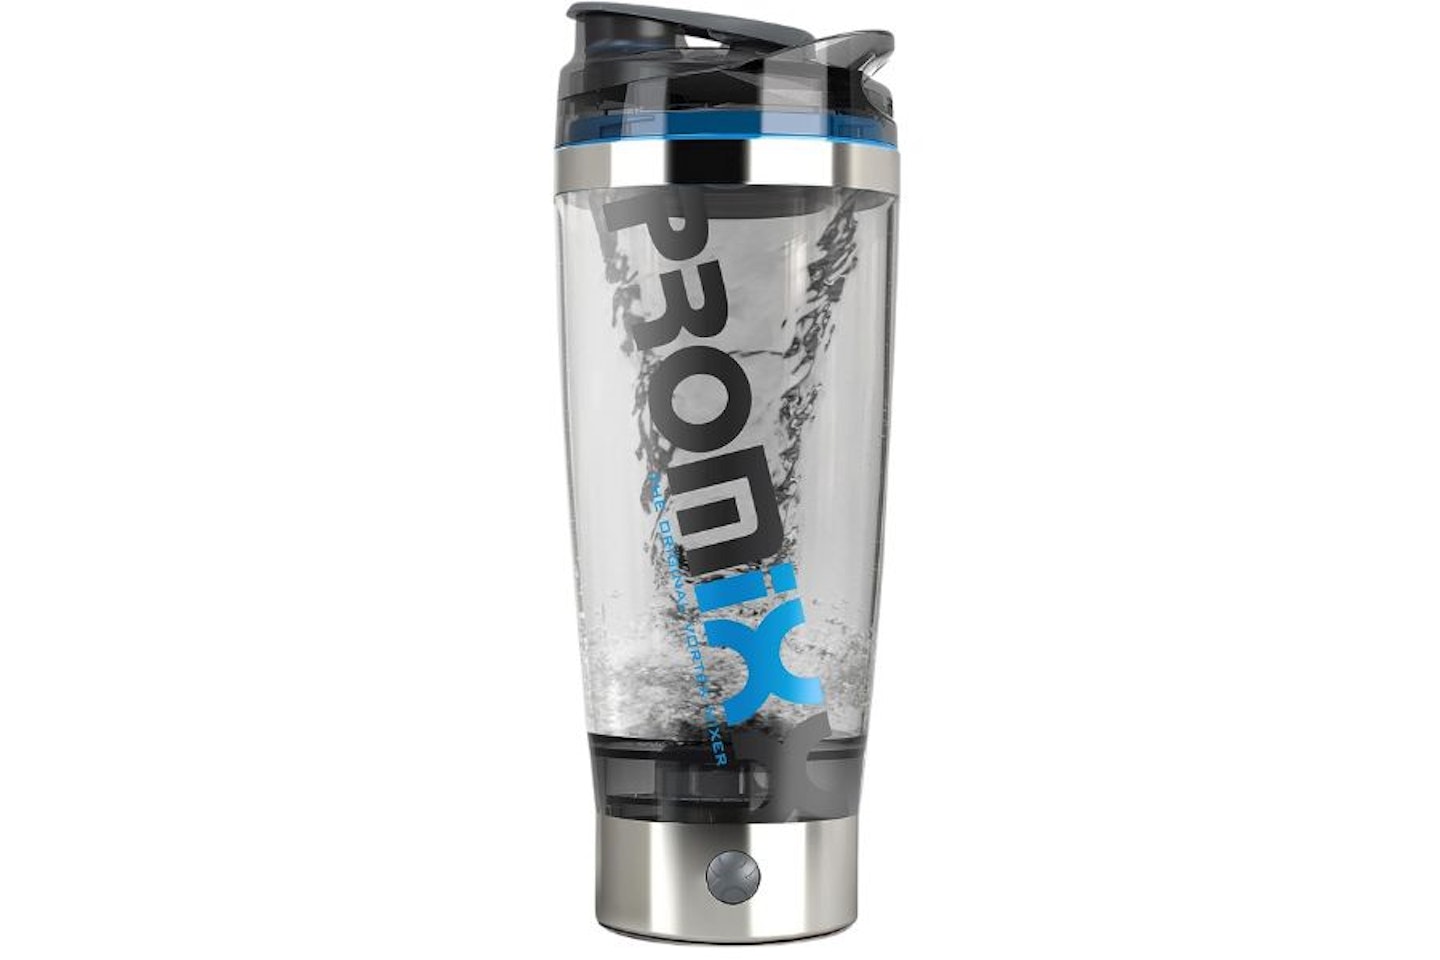 Promixx Vs Voltrx - Which Blender Is the Best?